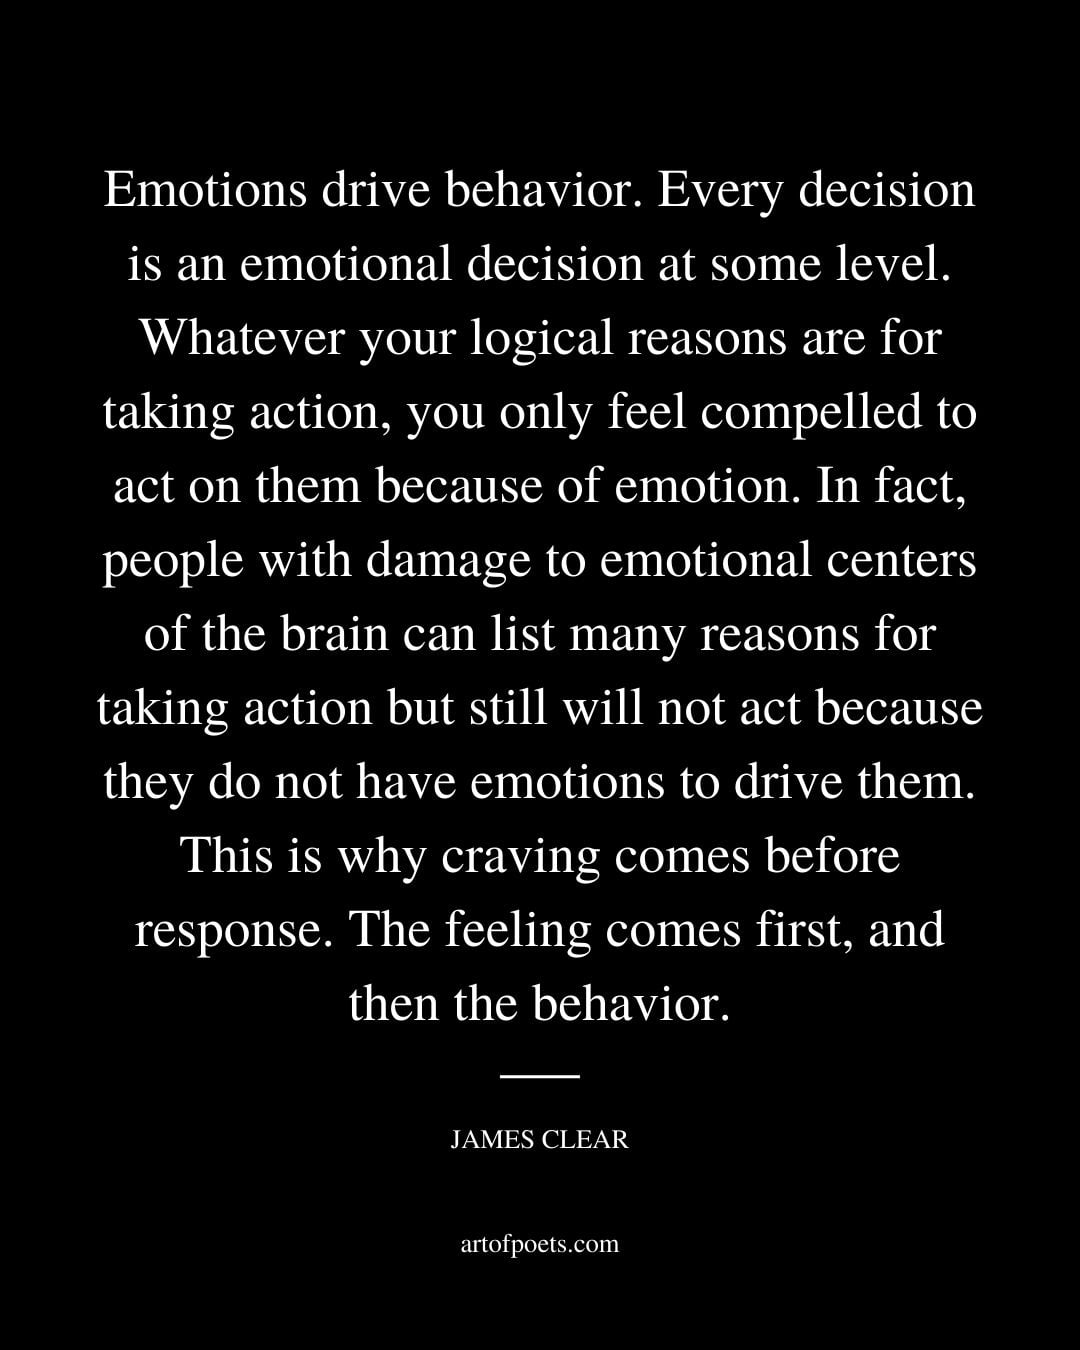 Emotions drive behavior. Every decision is an emotional decision at some level. Whatever your logical reasons are for taking action you only feel compelled to act on them because of emotion